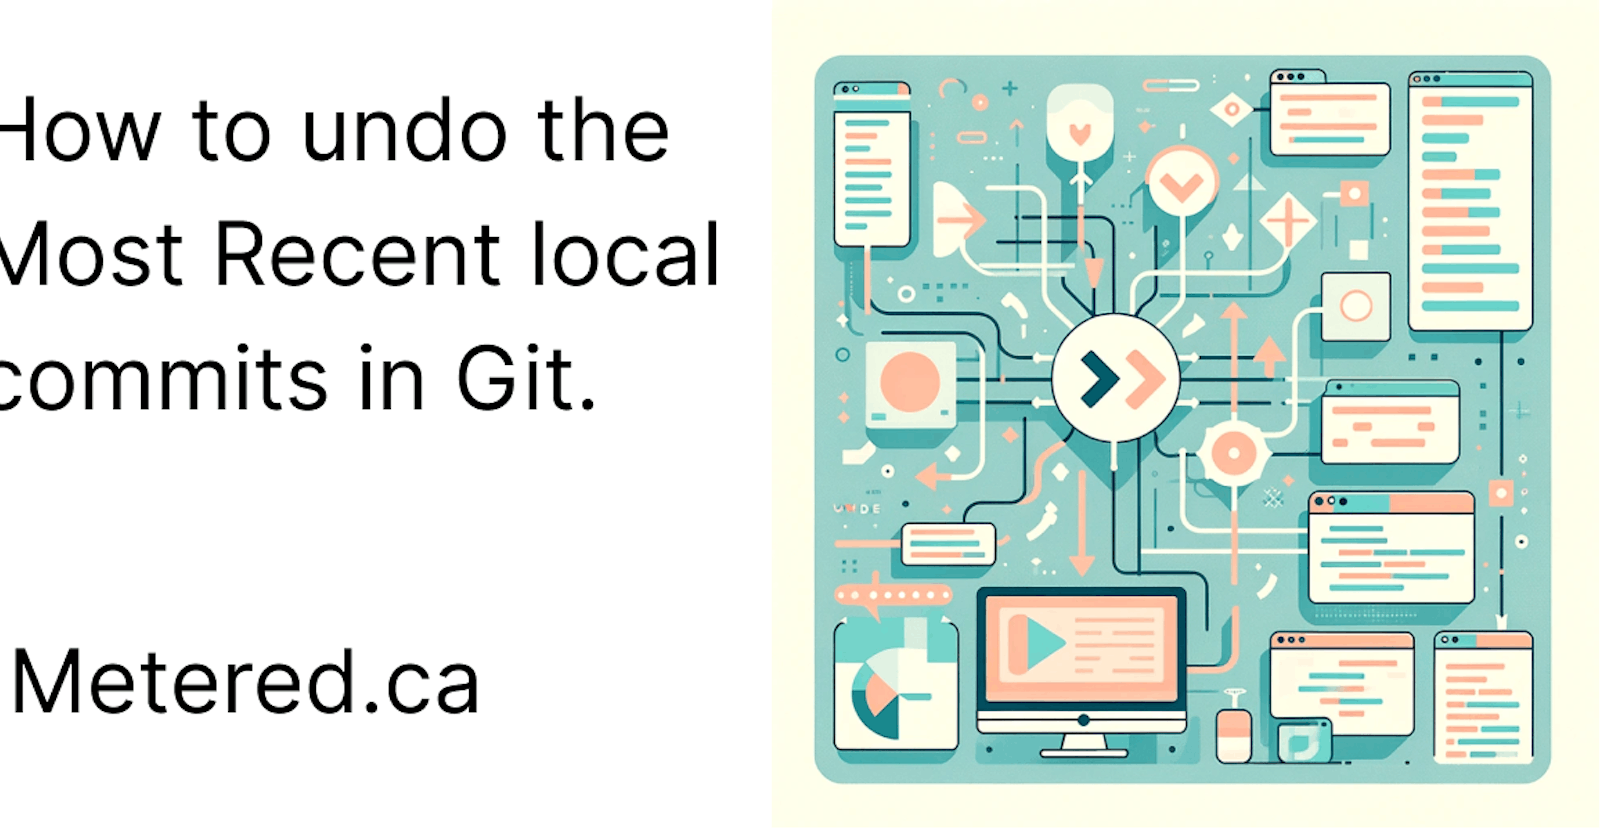 How to Undo the Most Recent Local Commits in Git?